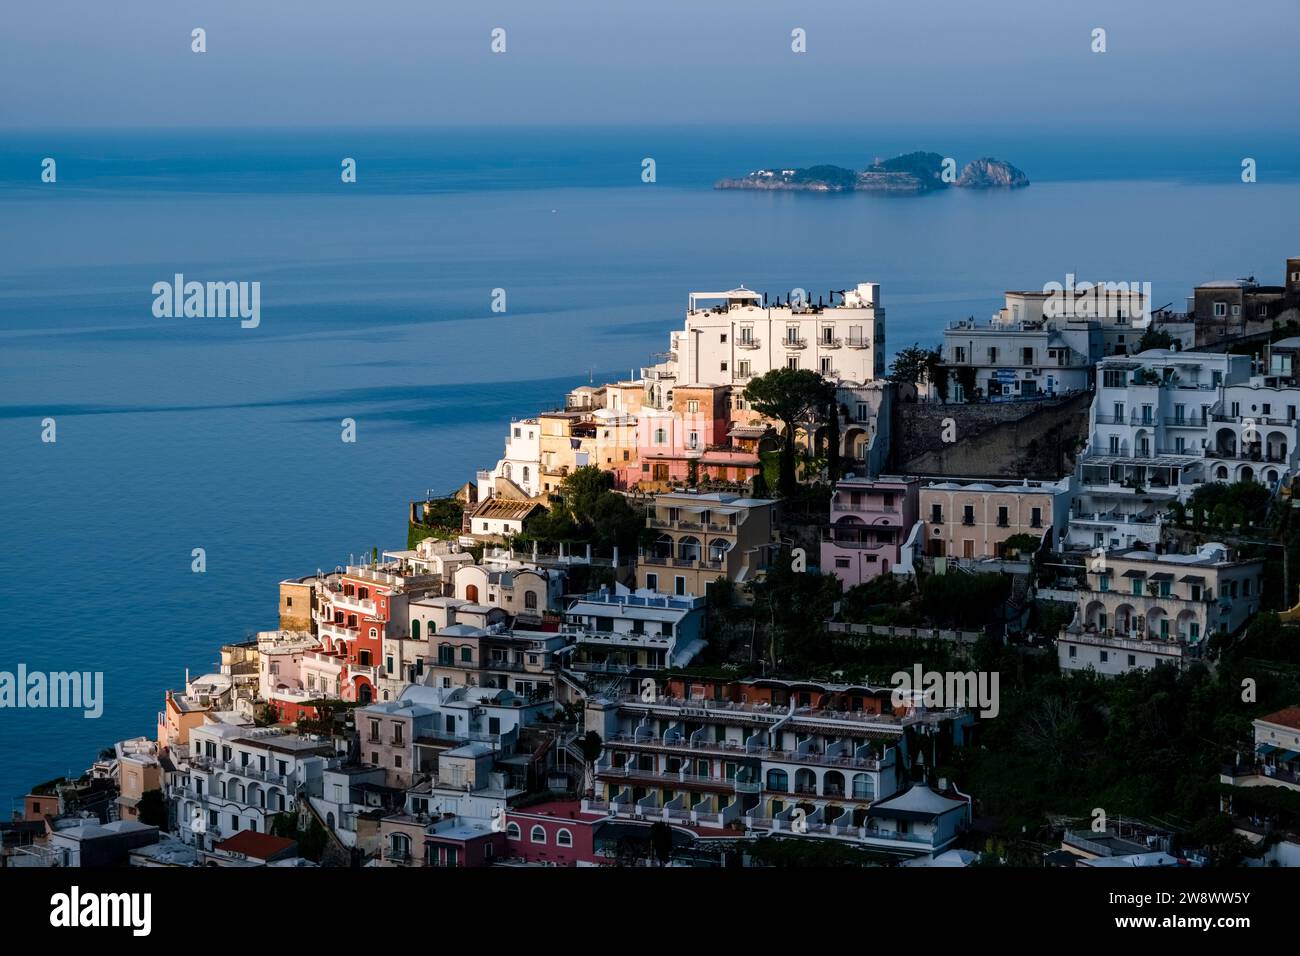 View of the town of Positano on the Amalfi Coast, situated on a hill overlooking the Mediterranean Sea. Stock Photo